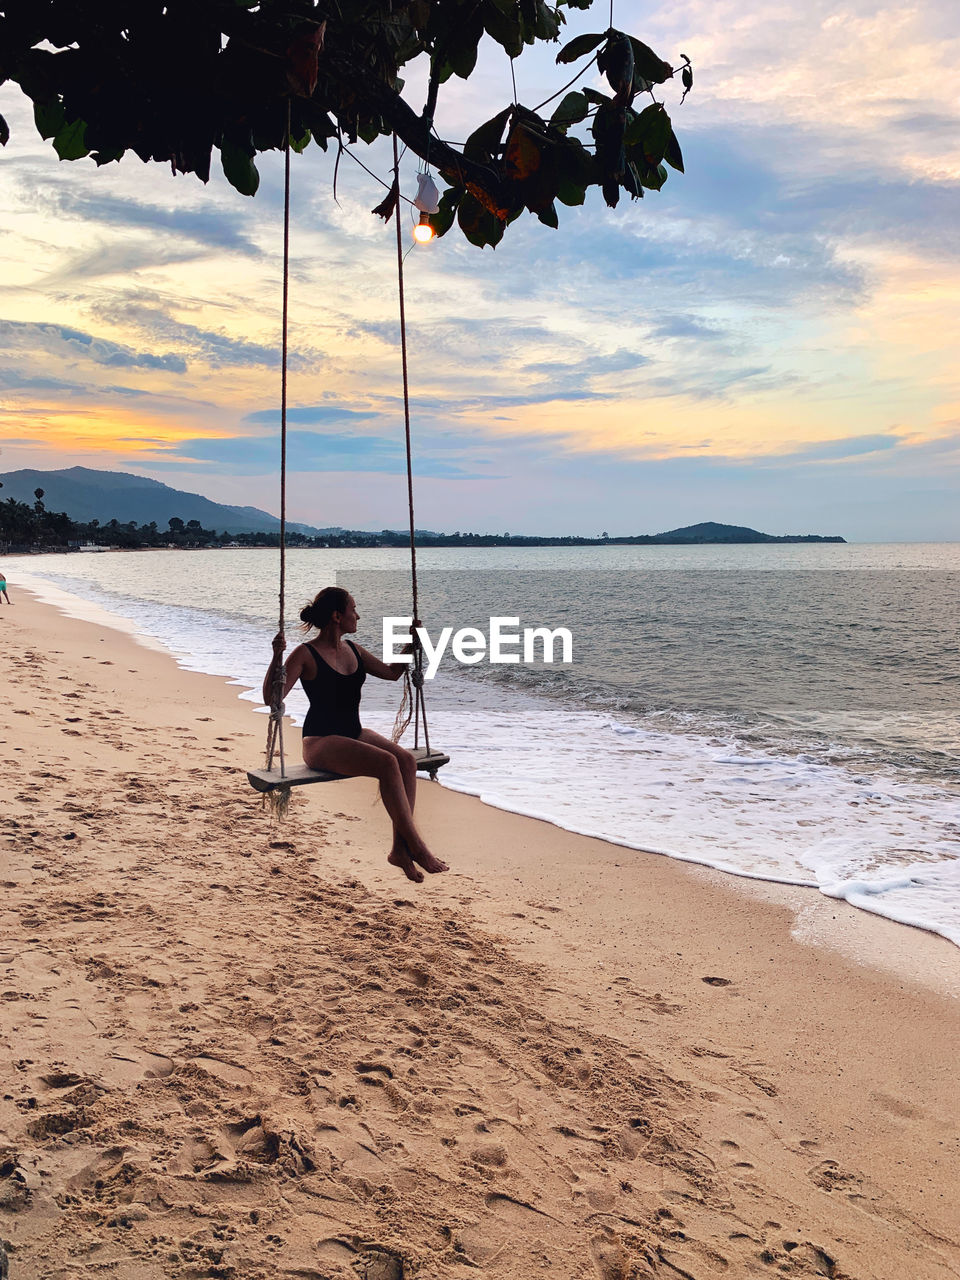 beach, land, water, sea, sky, sand, nature, shore, body of water, full length, one person, cloud, beauty in nature, leisure activity, ocean, coast, vacation, holiday, trip, scenics - nature, lifestyles, sunset, childhood, child, adult, swing, men, relaxation, tranquility, sitting, person, motion, outdoors, women, tranquil scene, tree, female, tropical climate, horizon over water, idyllic, sunlight, wave, sports, travel, summer, travel destinations, enjoyment, horizon, day